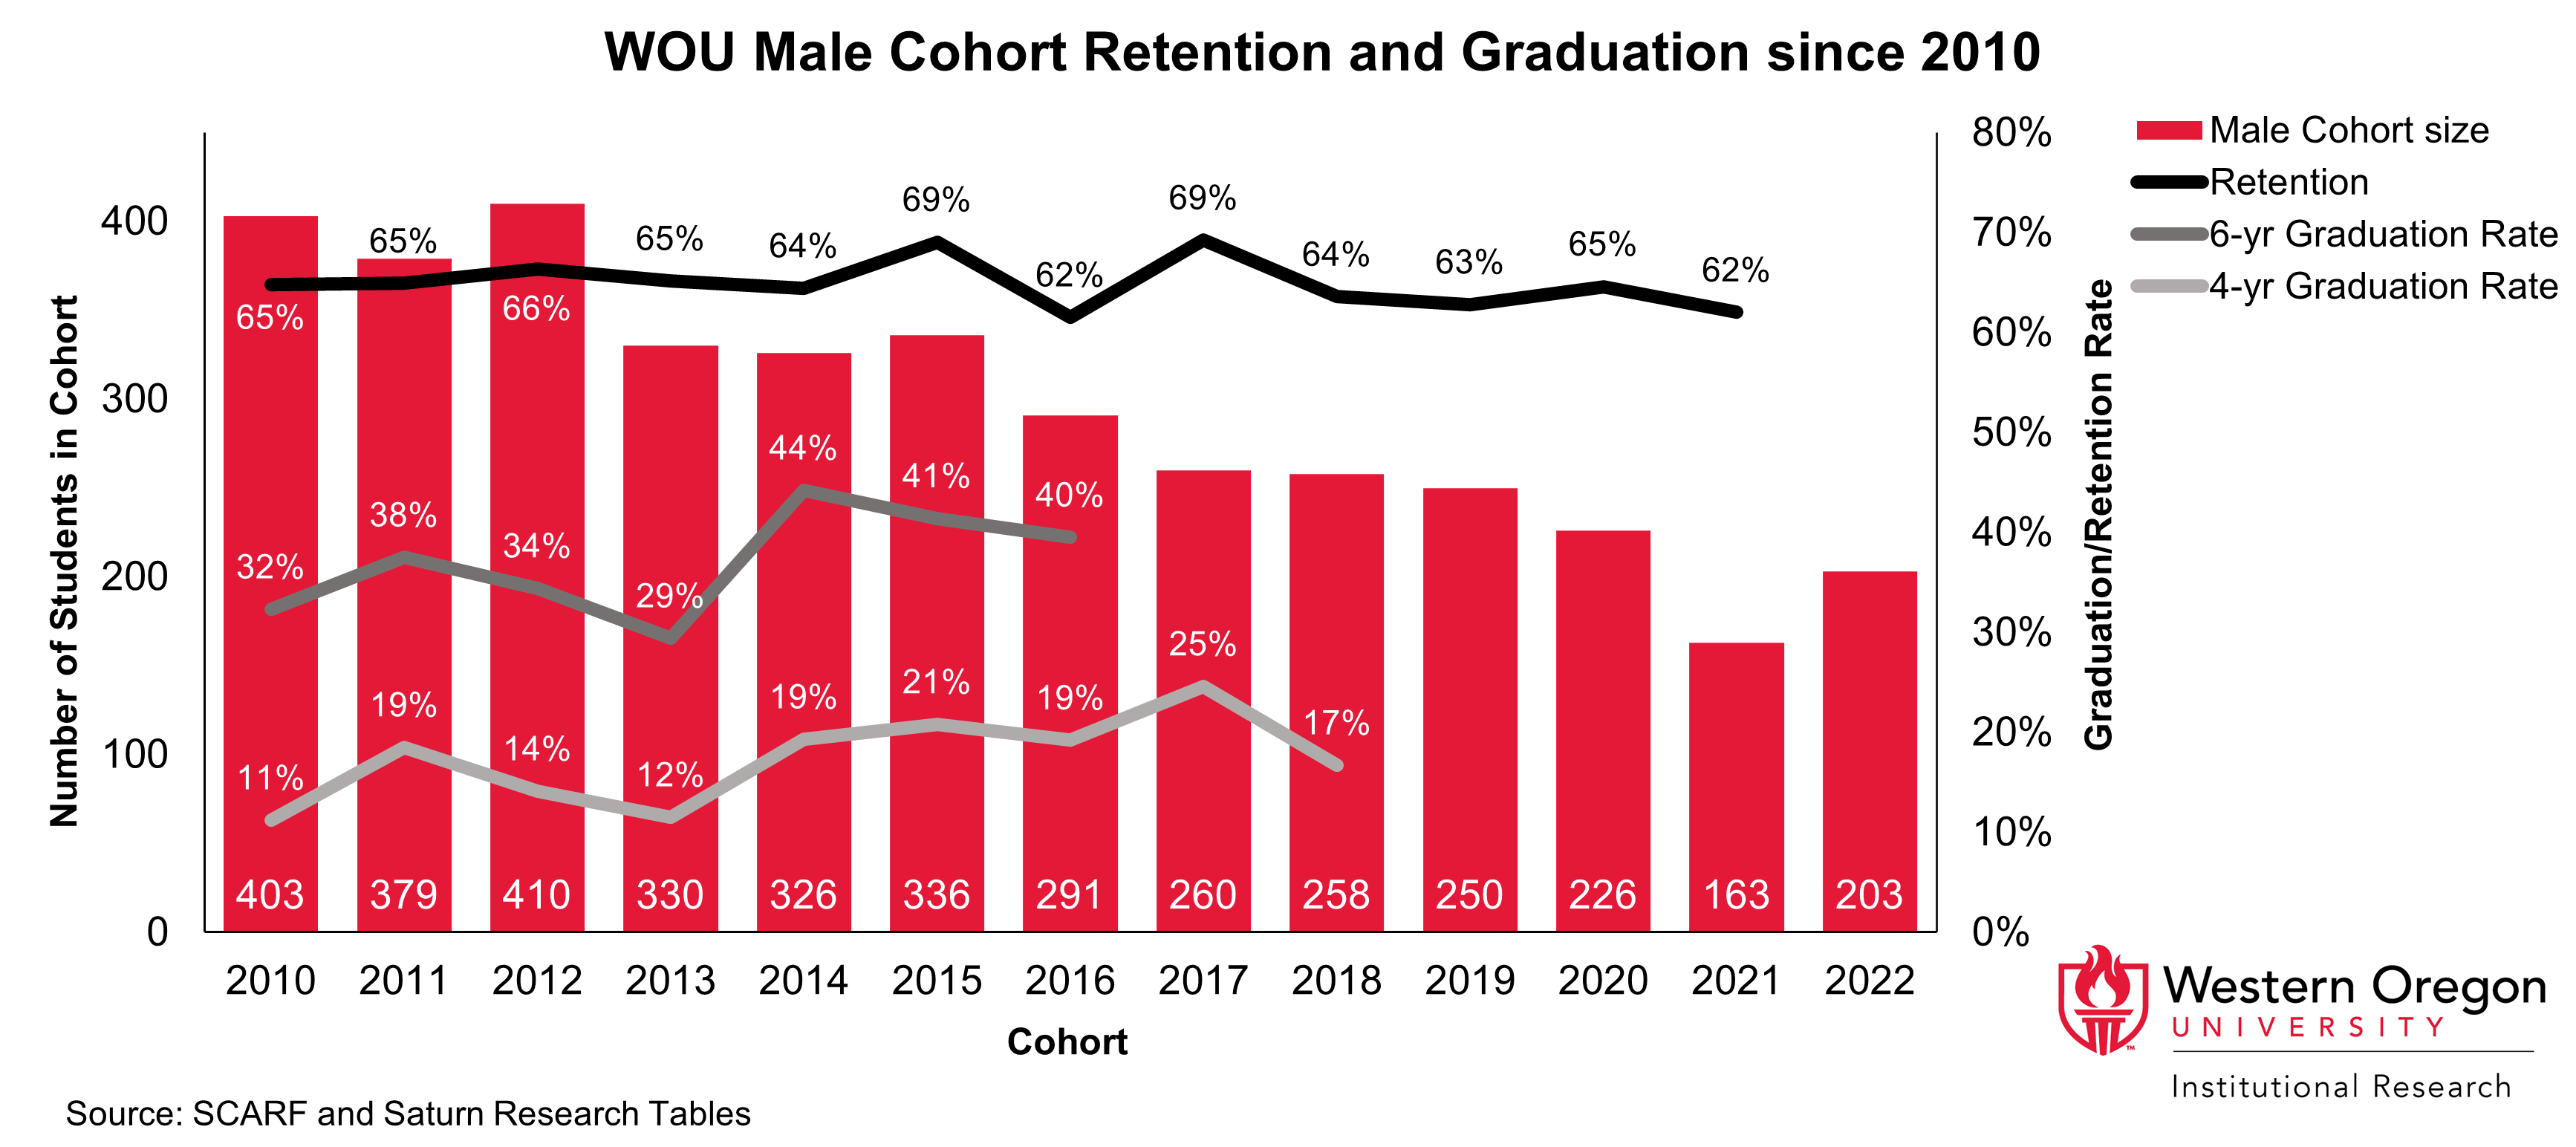 Bar and line graph of retention and 4- and 6-year graduation rates since 2010 for WOU students that are male, showing that 6-year graduation rates have been steadily increasing while retention rates and 4-year graduation rates have remained largely stable